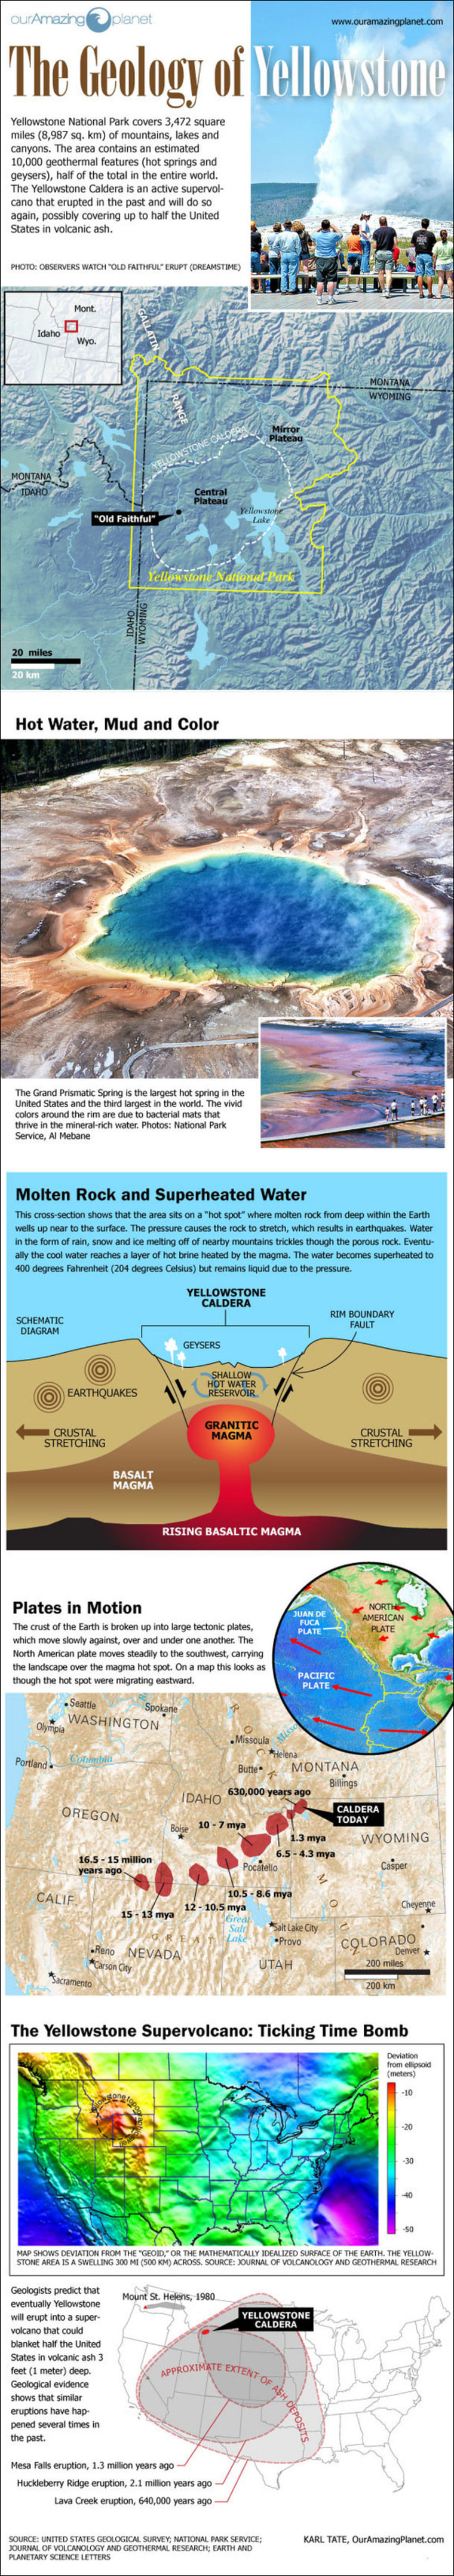 The geology of Yellowstone National Park, including the caldera under it.